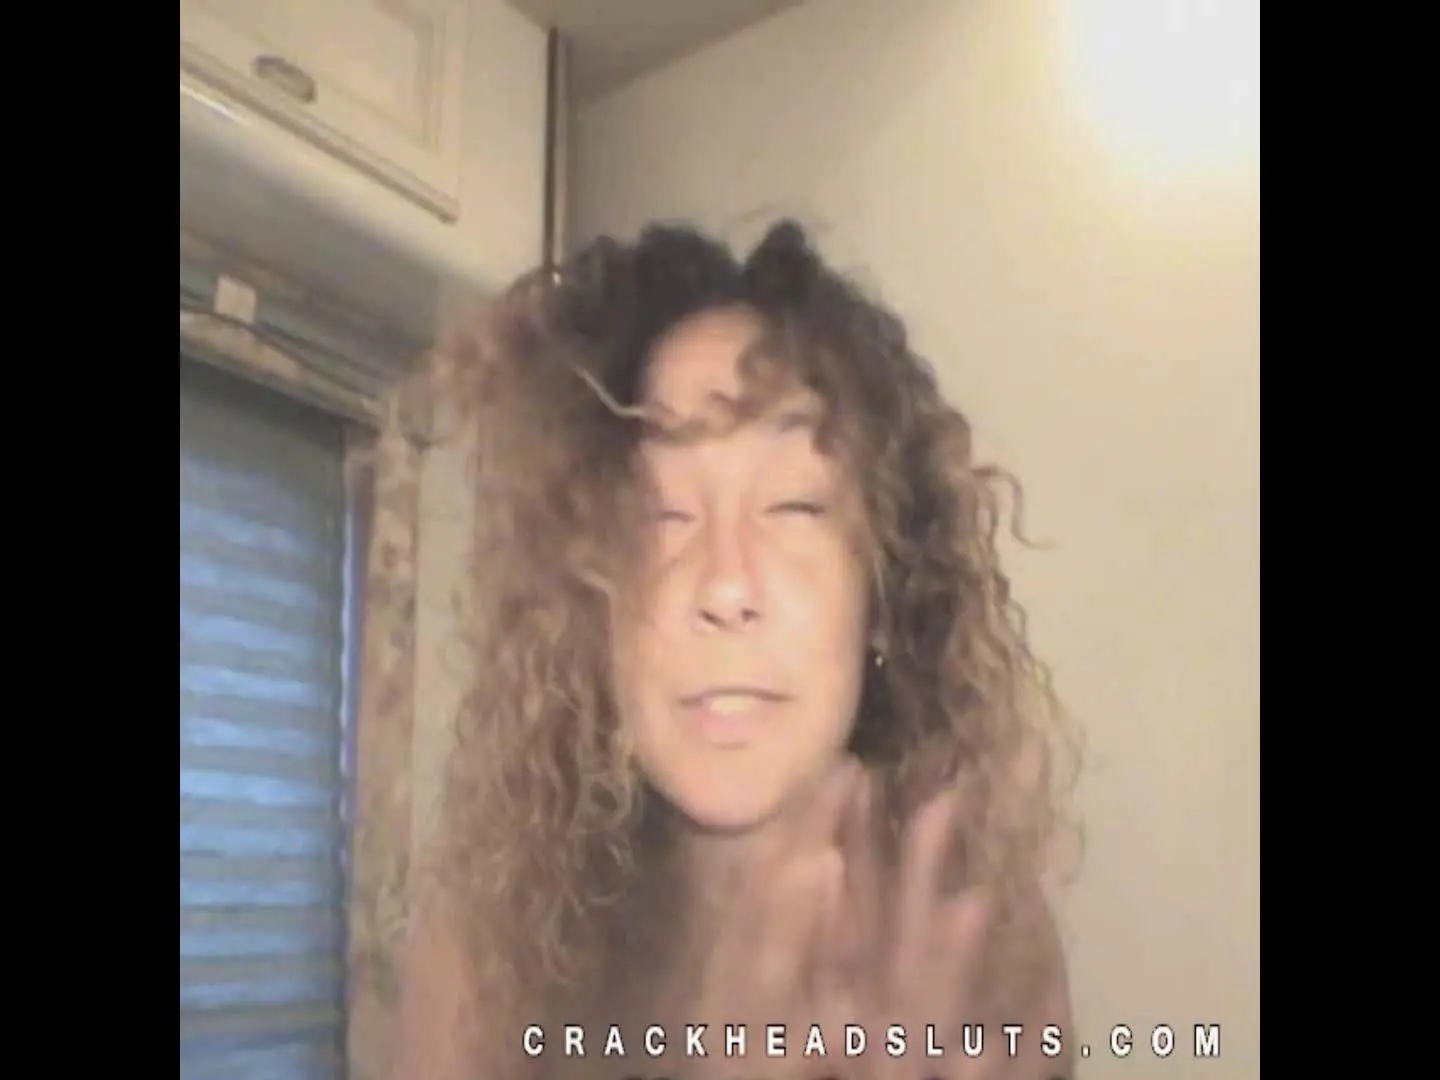 Real crackhead interview and hot blowjob picture pic